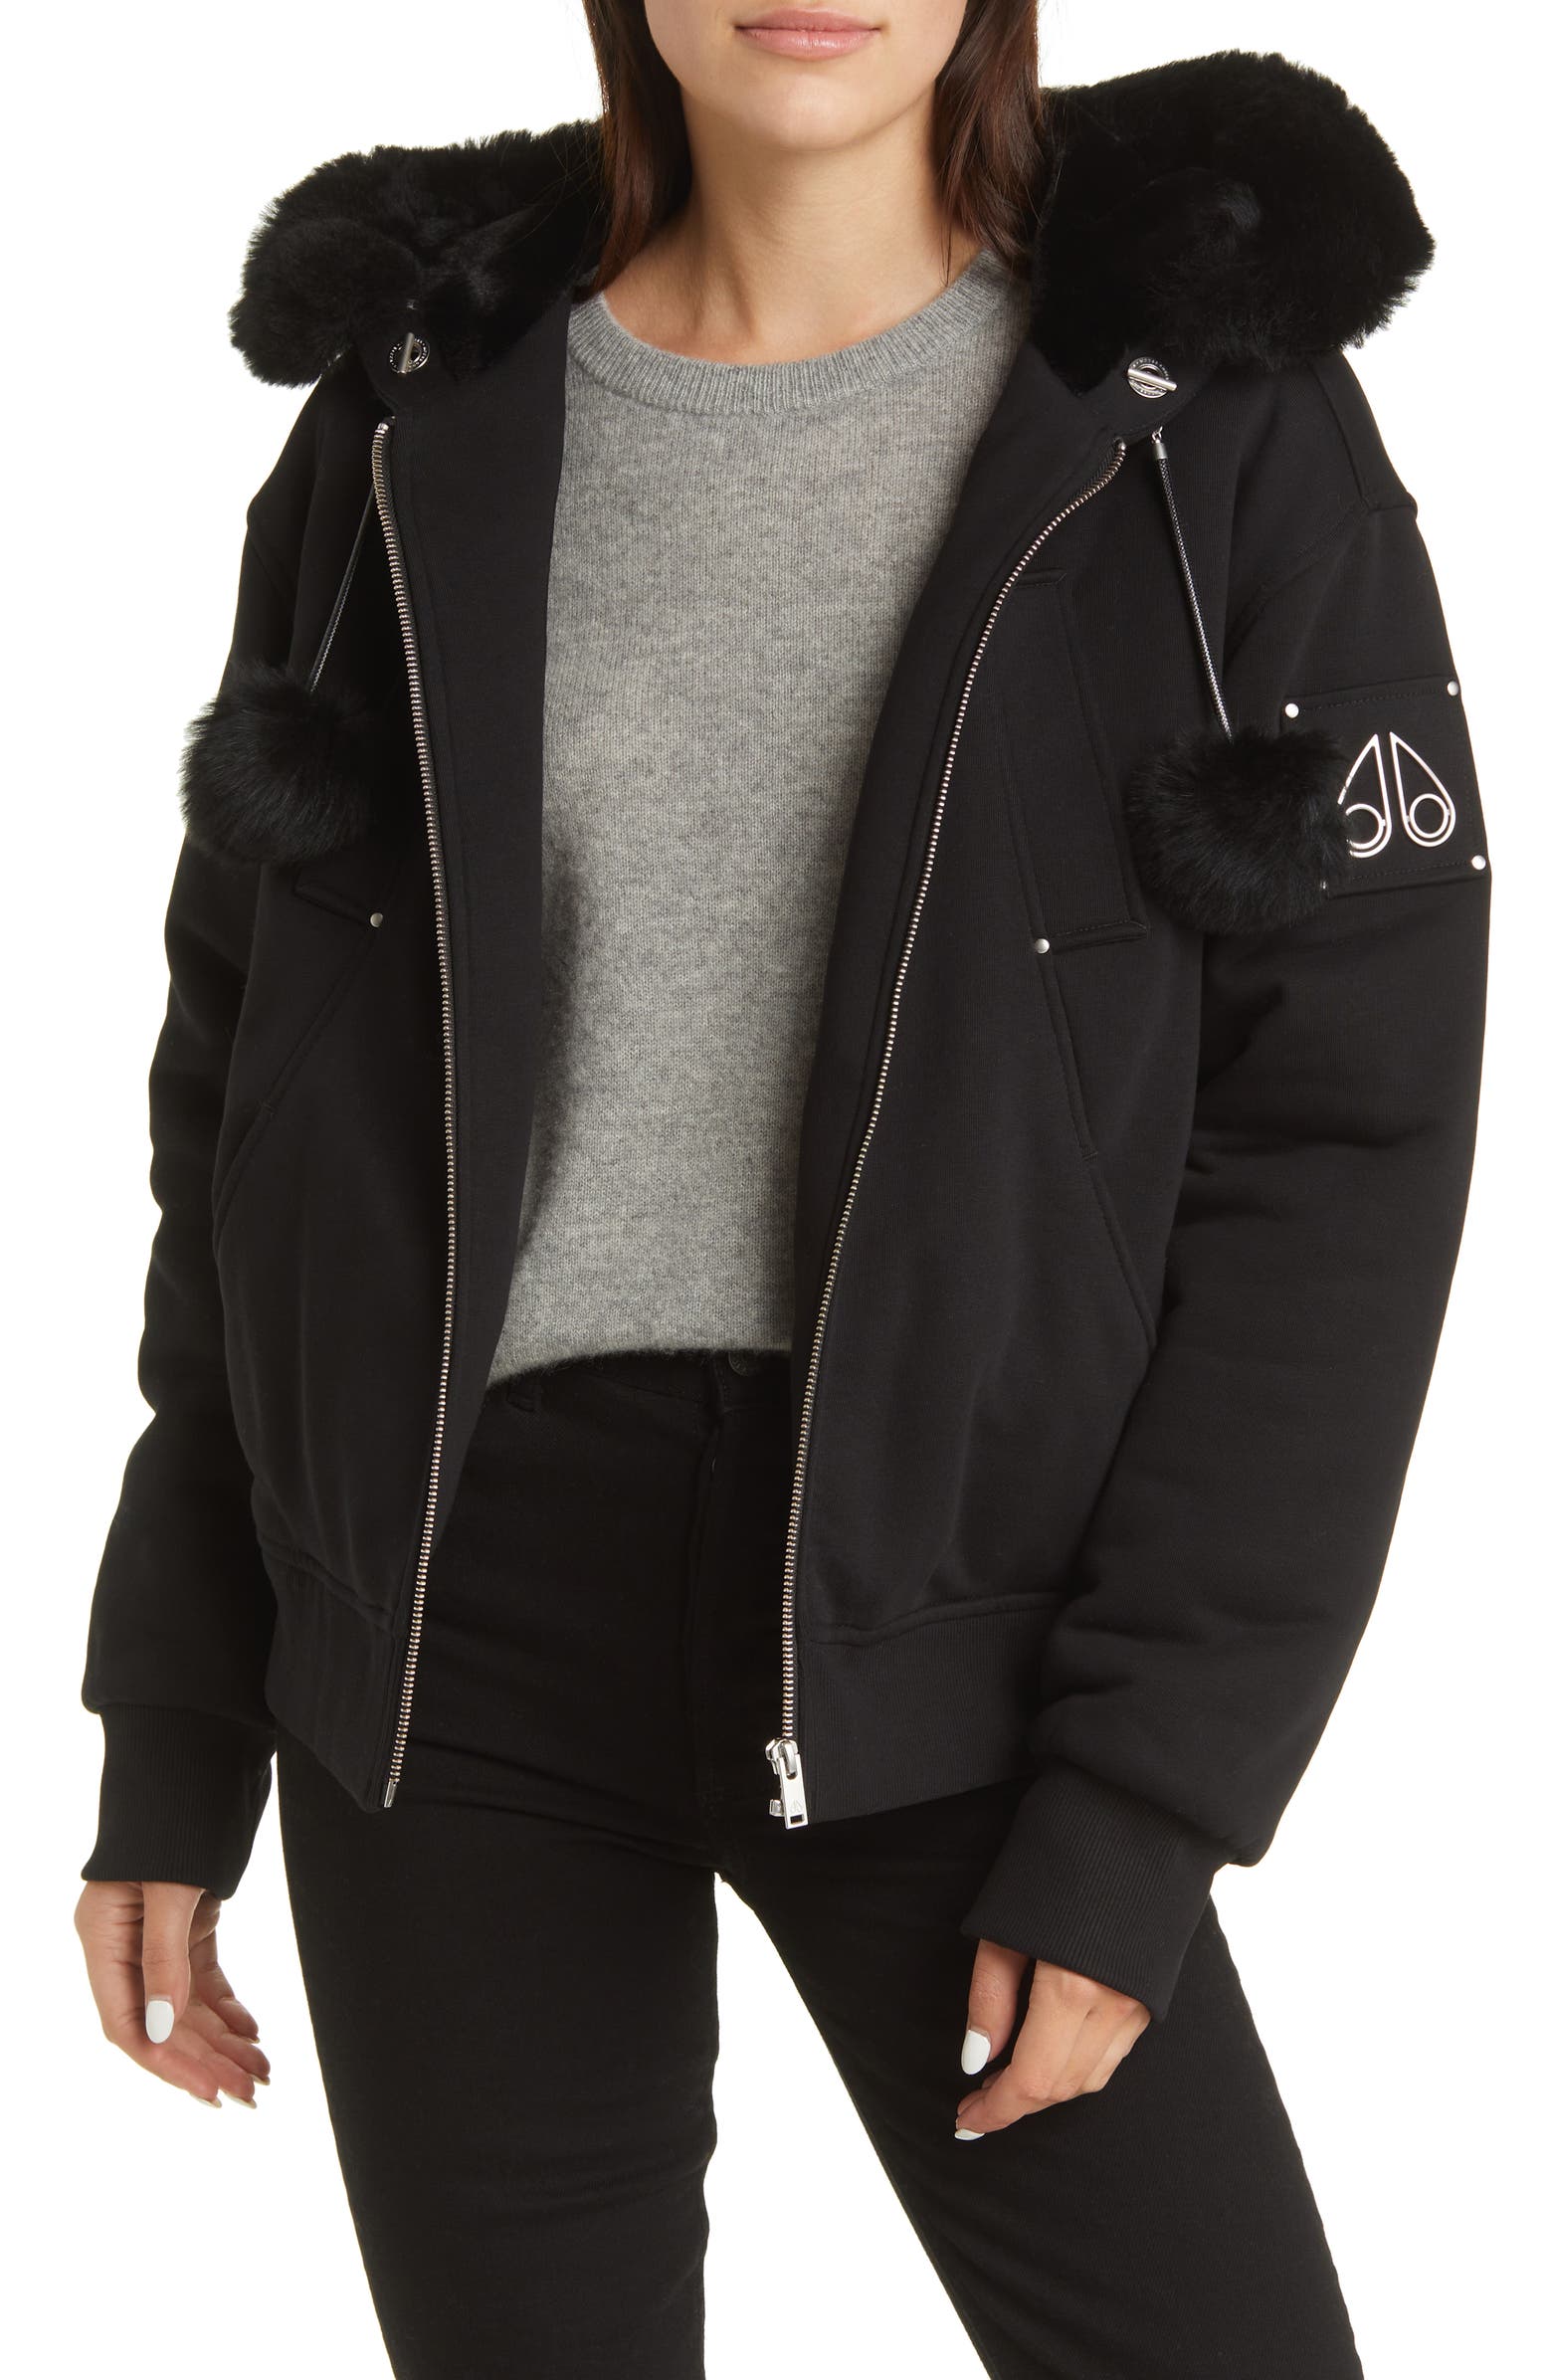 Black puffer jacket like Canada Goose from Moose Knuckles